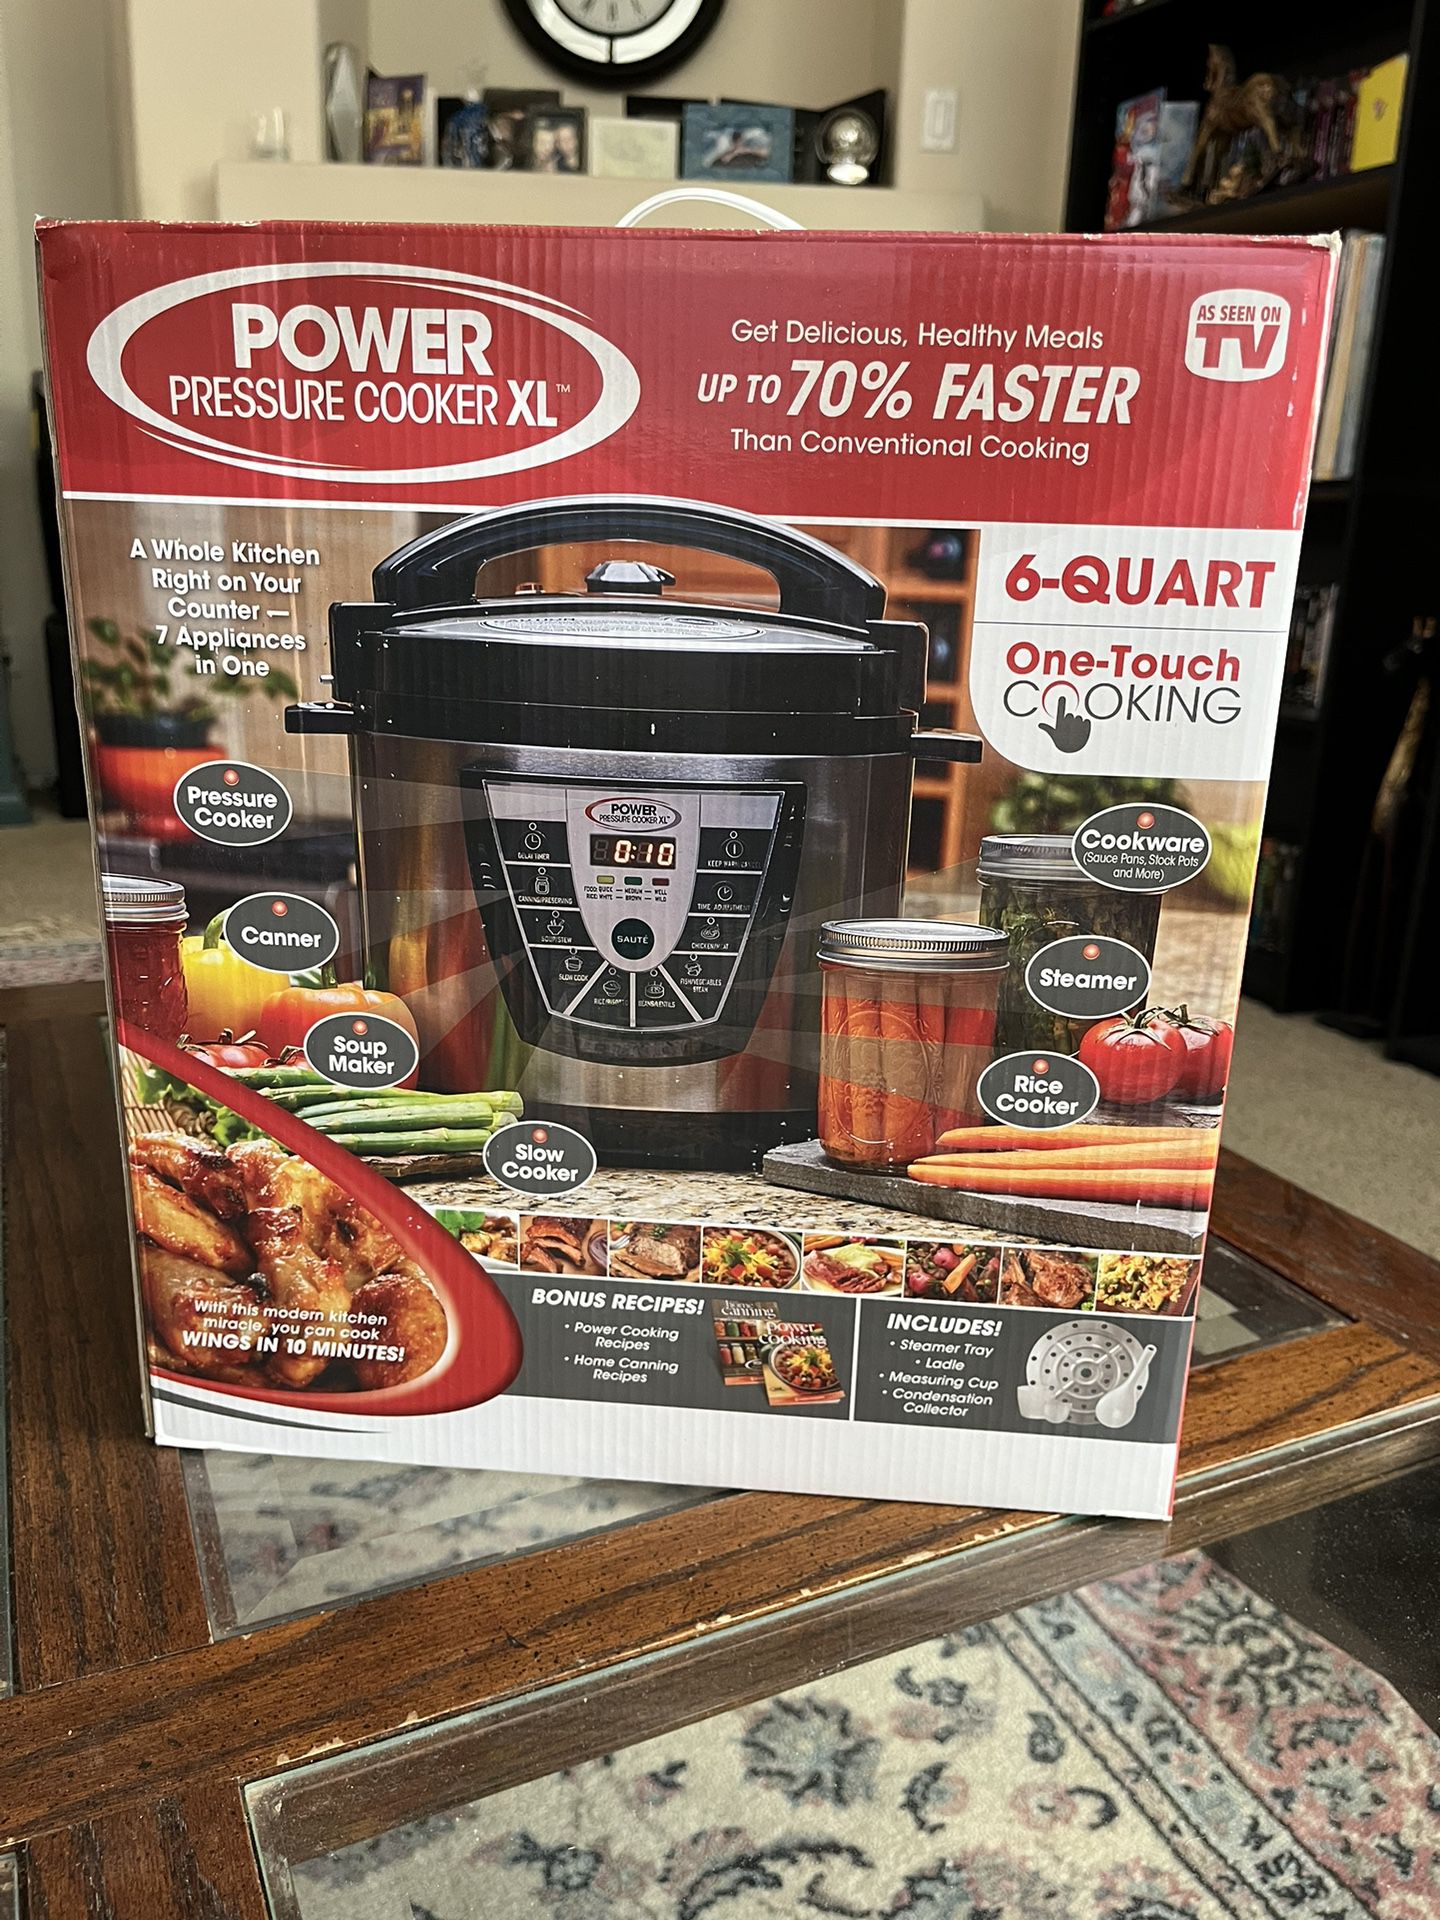 As Seen On TV Power Pressure Cooker XL 6qt. BRAND NEW IN BOX!